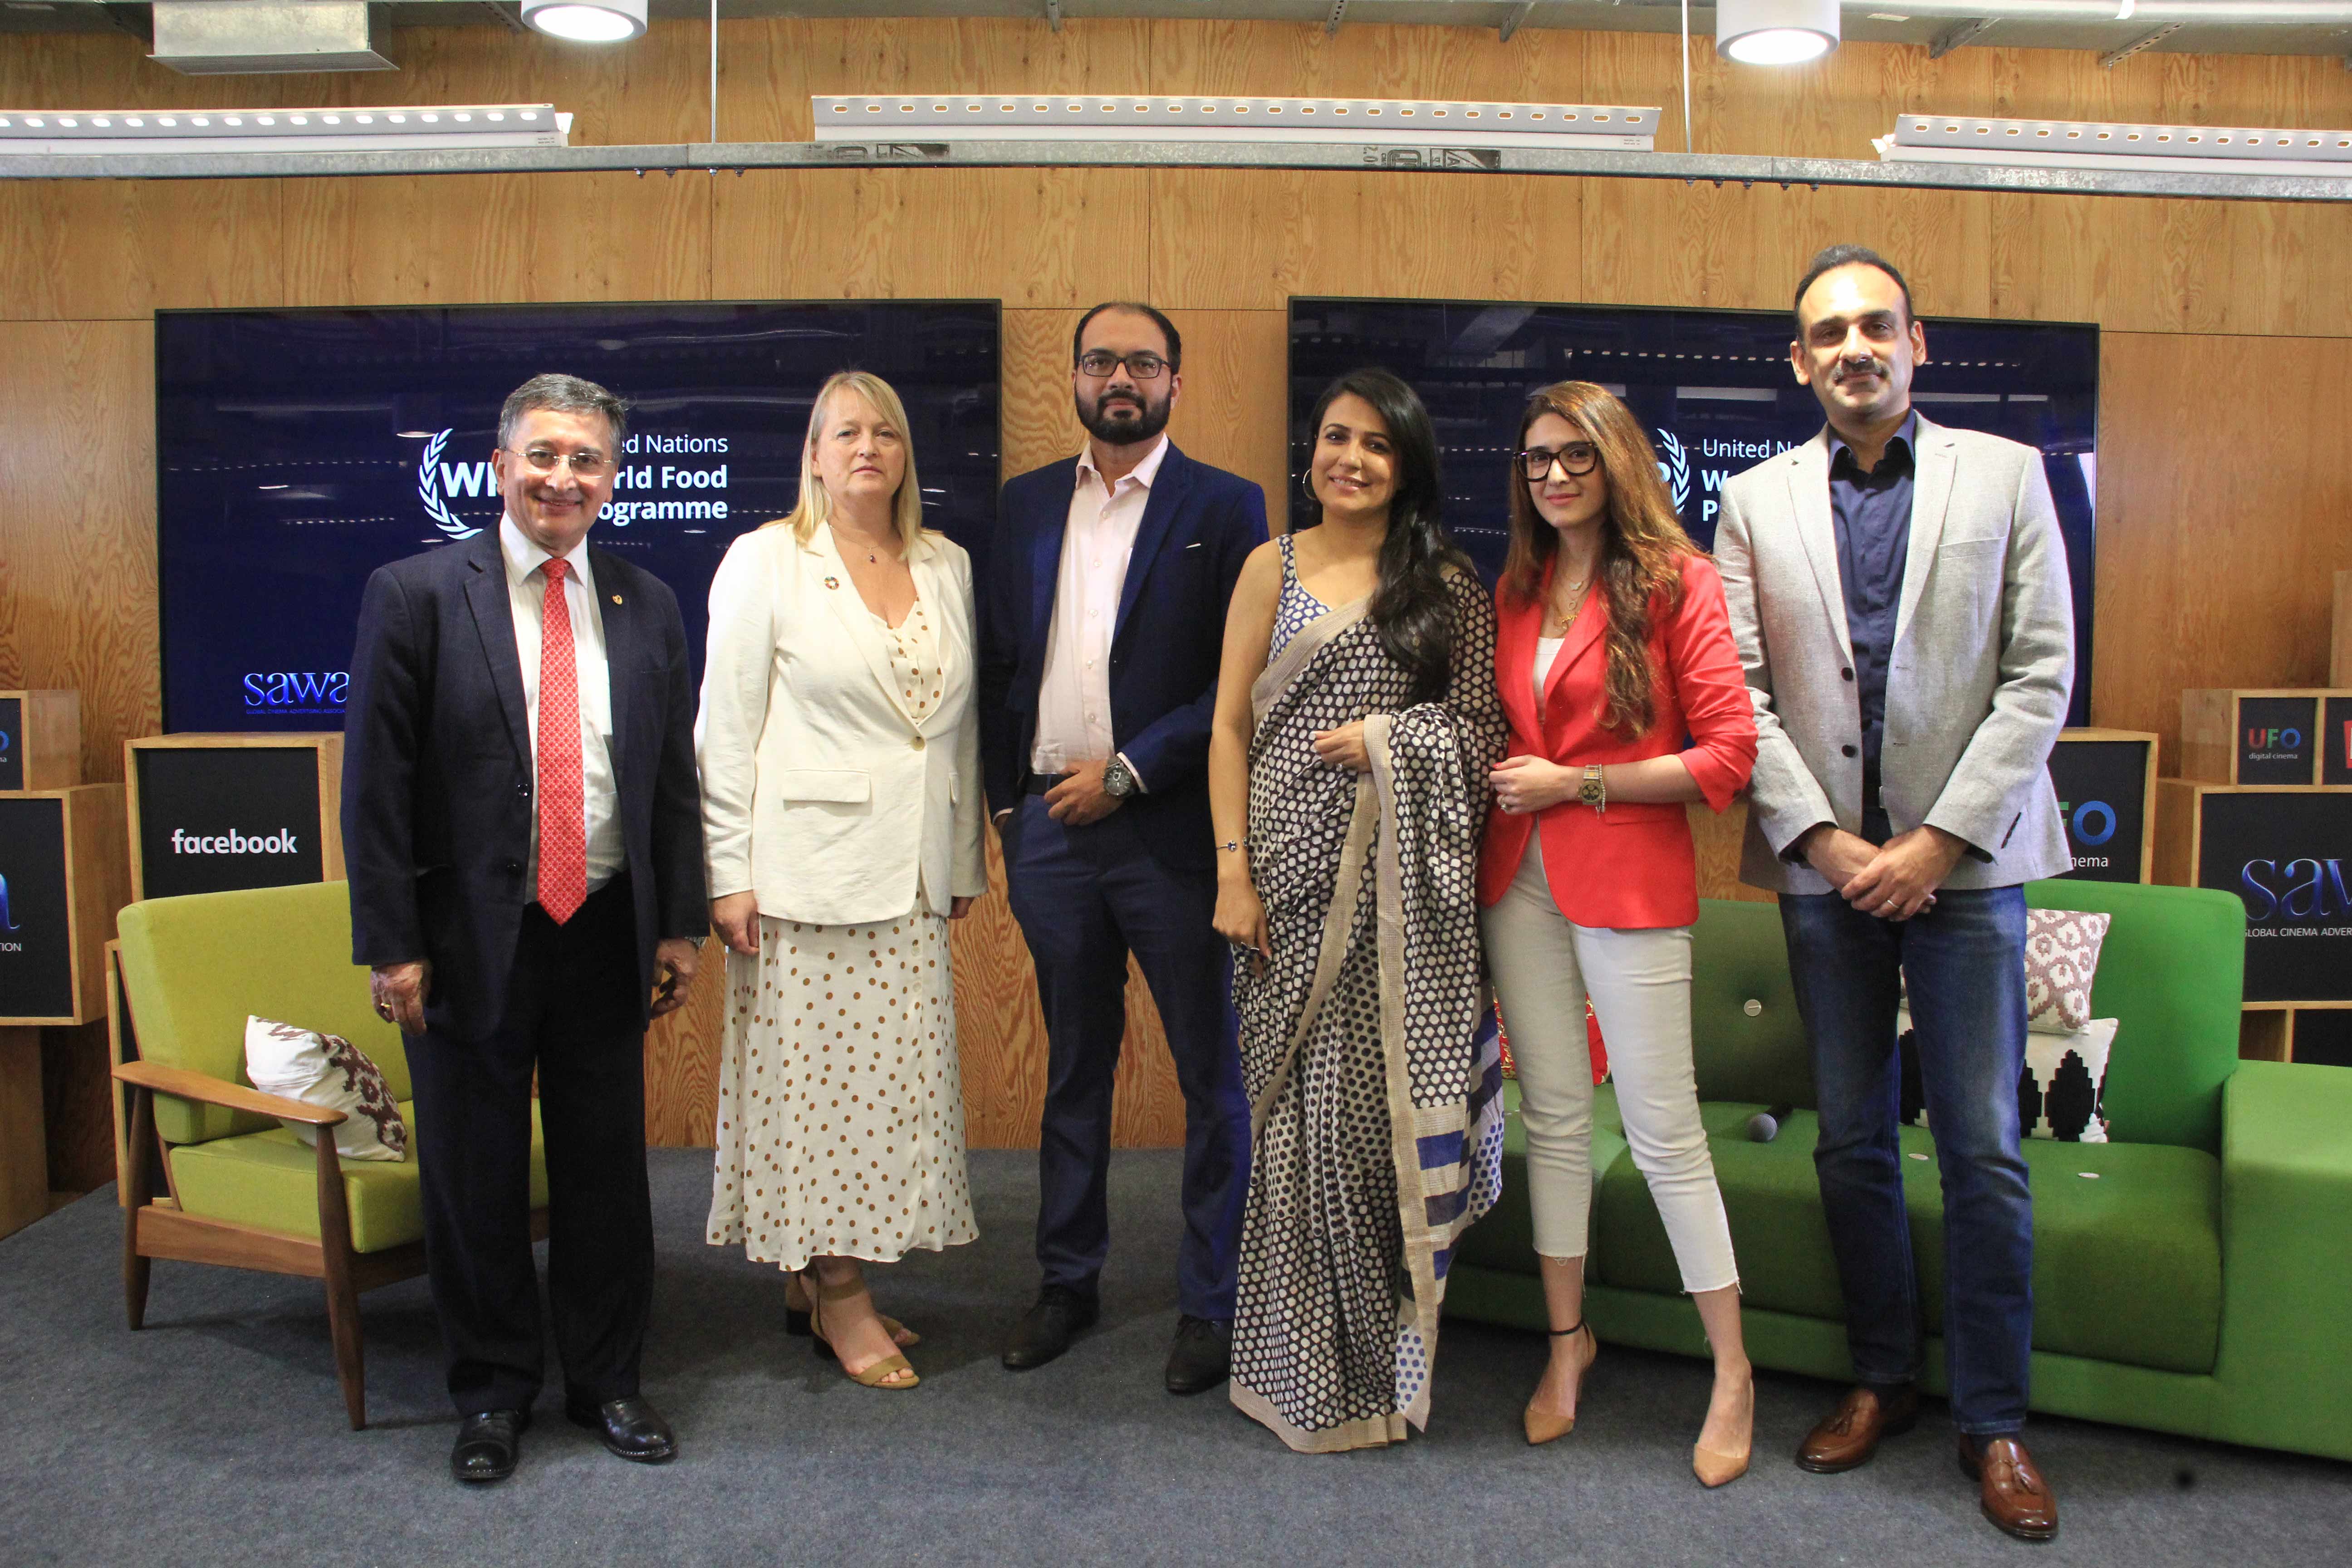 From Left to Right: Mr. Bishow Parajuli, Representative, UN WFP, India, Ms Corinne Woods, Global Director, CAM, UNWFP, Mr Amit Nair, Business Head, Living Foodz along with Mini Mathur, Celebrity Nutritionist Ms Pooja Makhija and Mr Siddharth Bharadwaj, Chief Marketing Officer, UFO Moviez -By Sachin Murdeshwar GPN